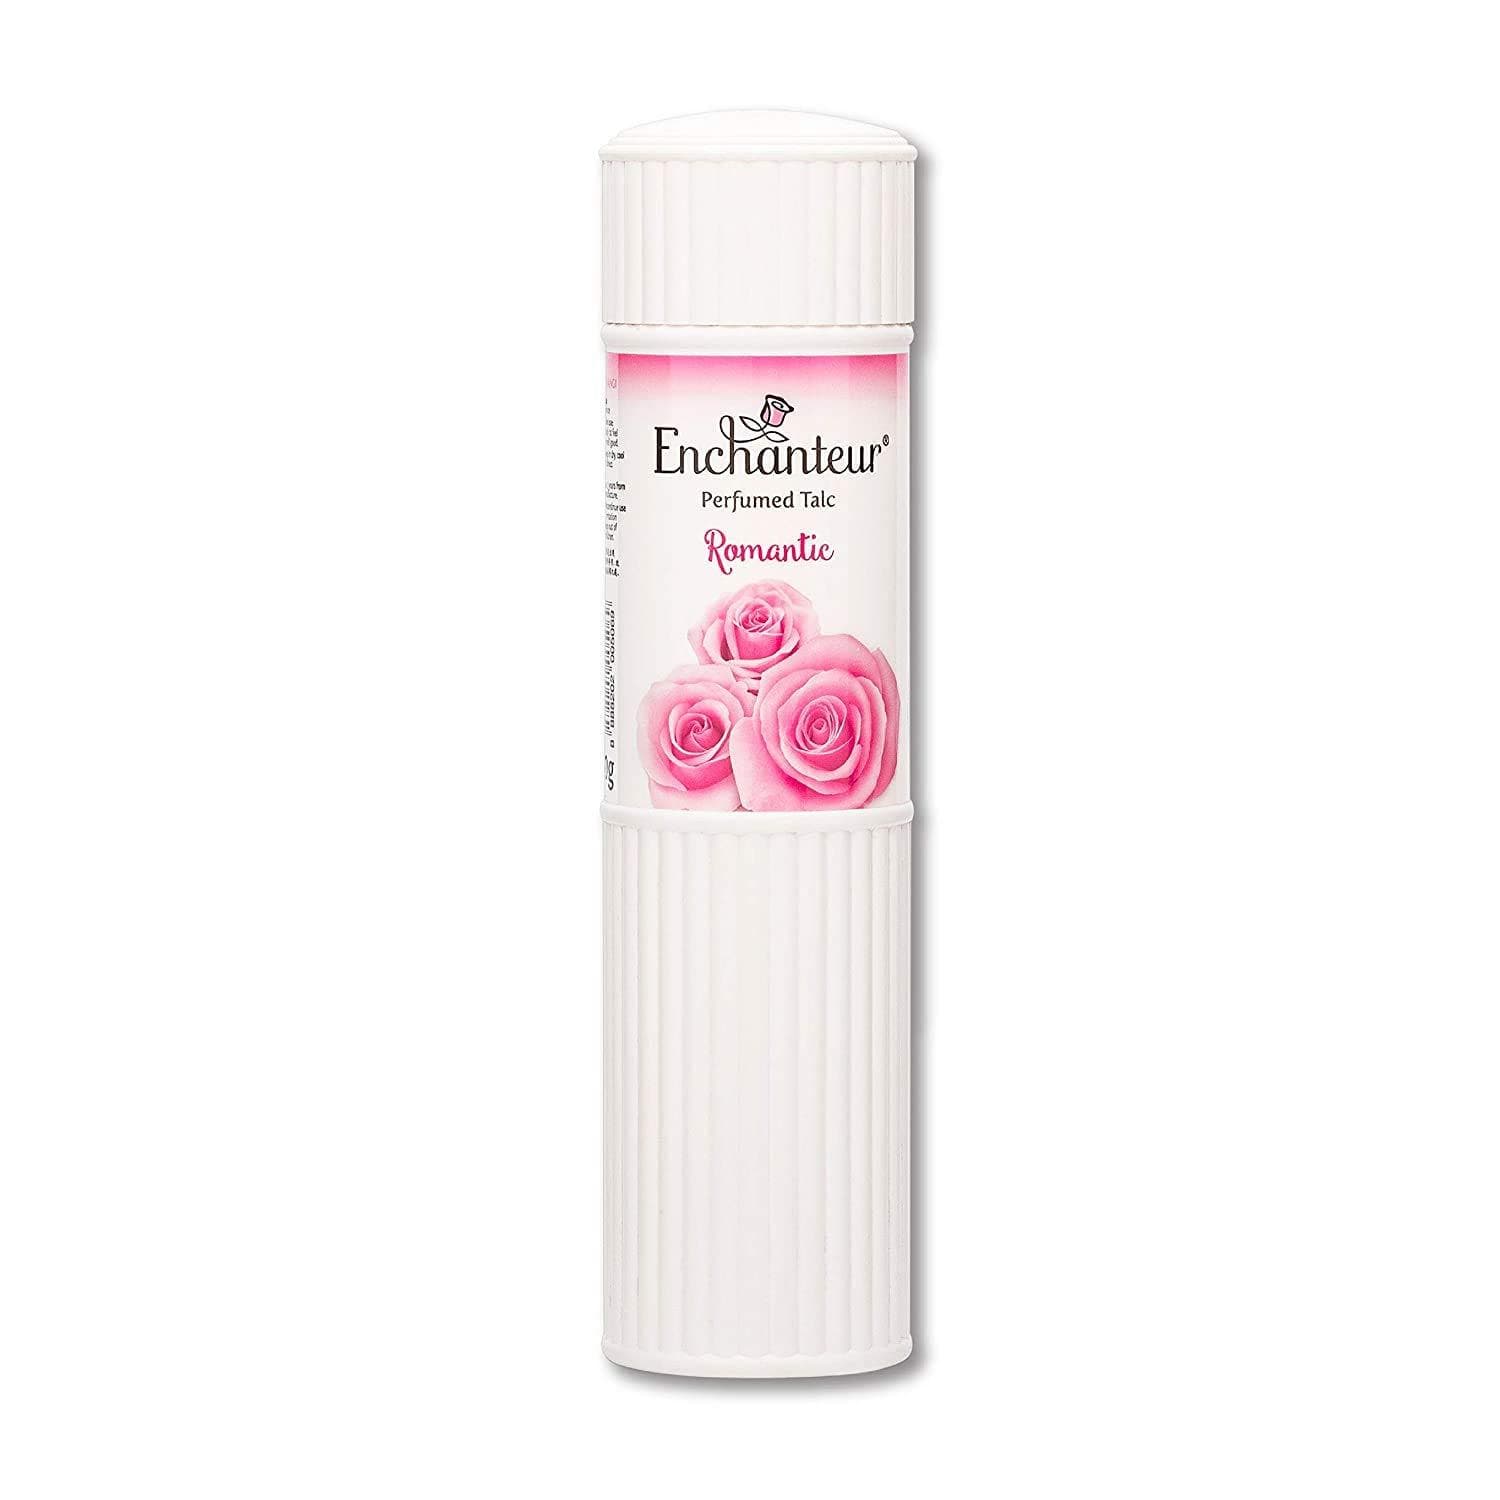 Enchanteur Romantic Perfumed Talc for Women, 250g with Roses & Jasmine Extracts - Instachiq